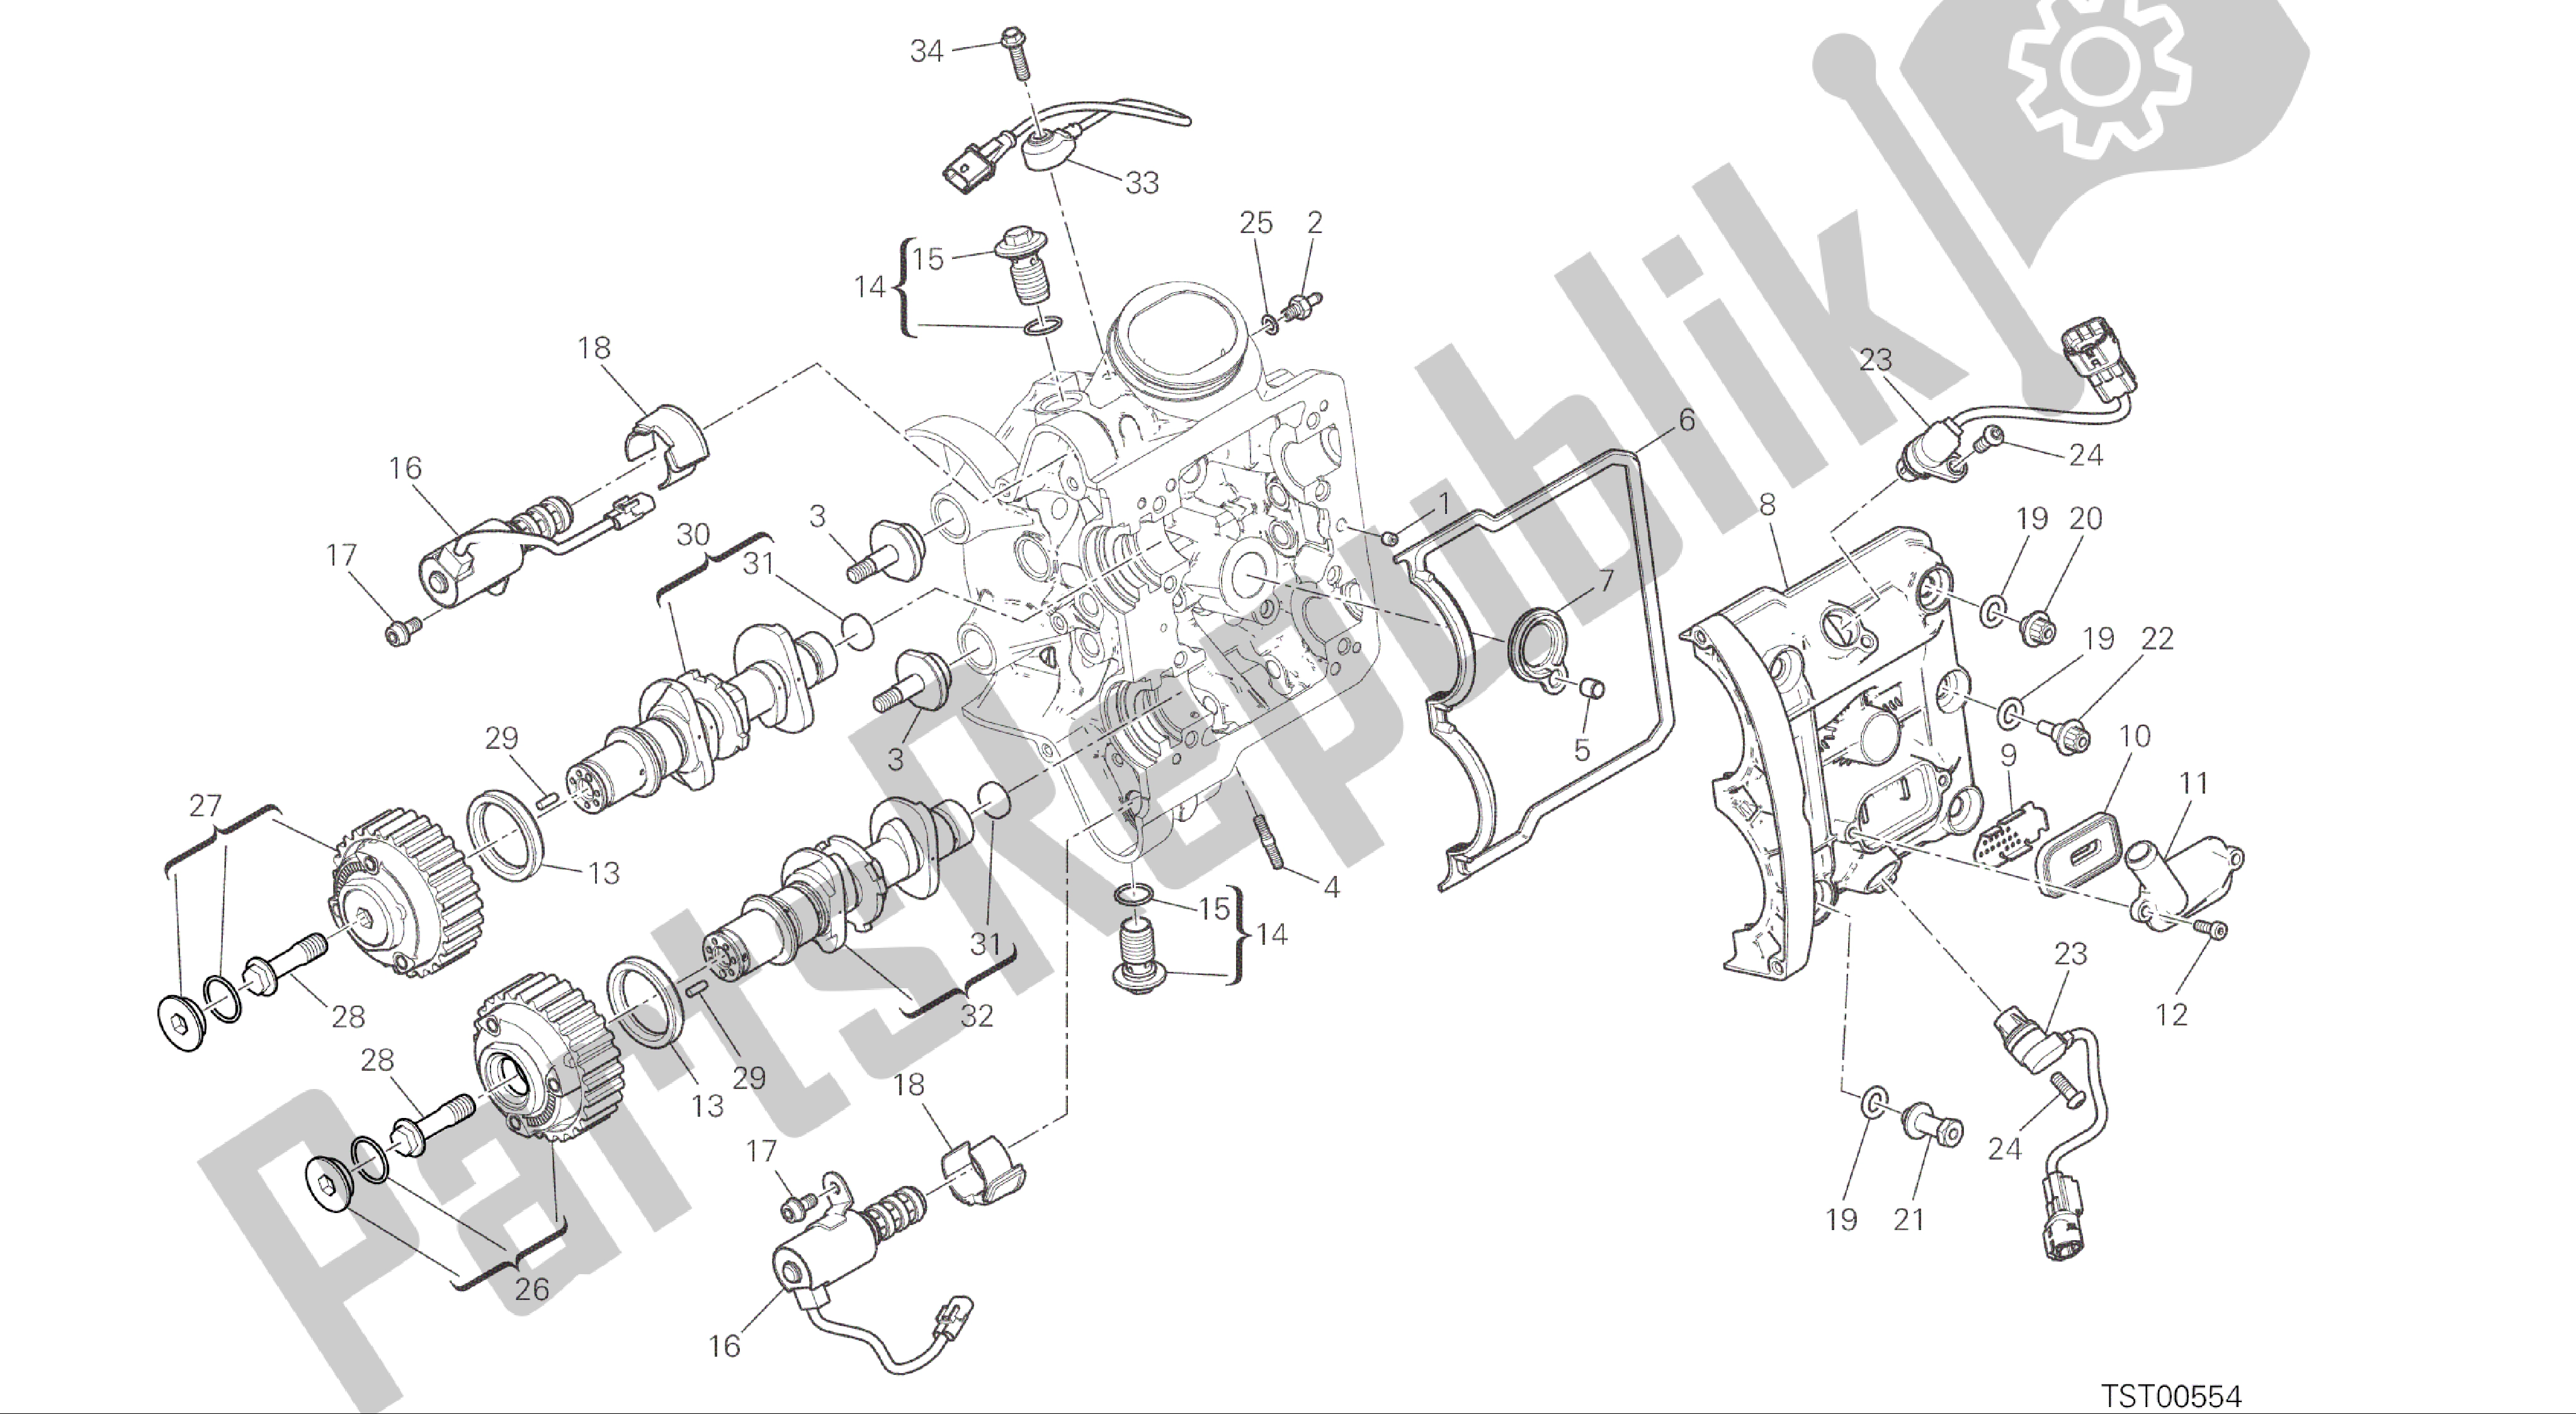 All parts for the Drawing 13b - Testa Orizzontale - Distribuzione[mod:ms1200;xst:aus,eur,fra,jap]group Engine of the Ducati Multistrada 1200 2015